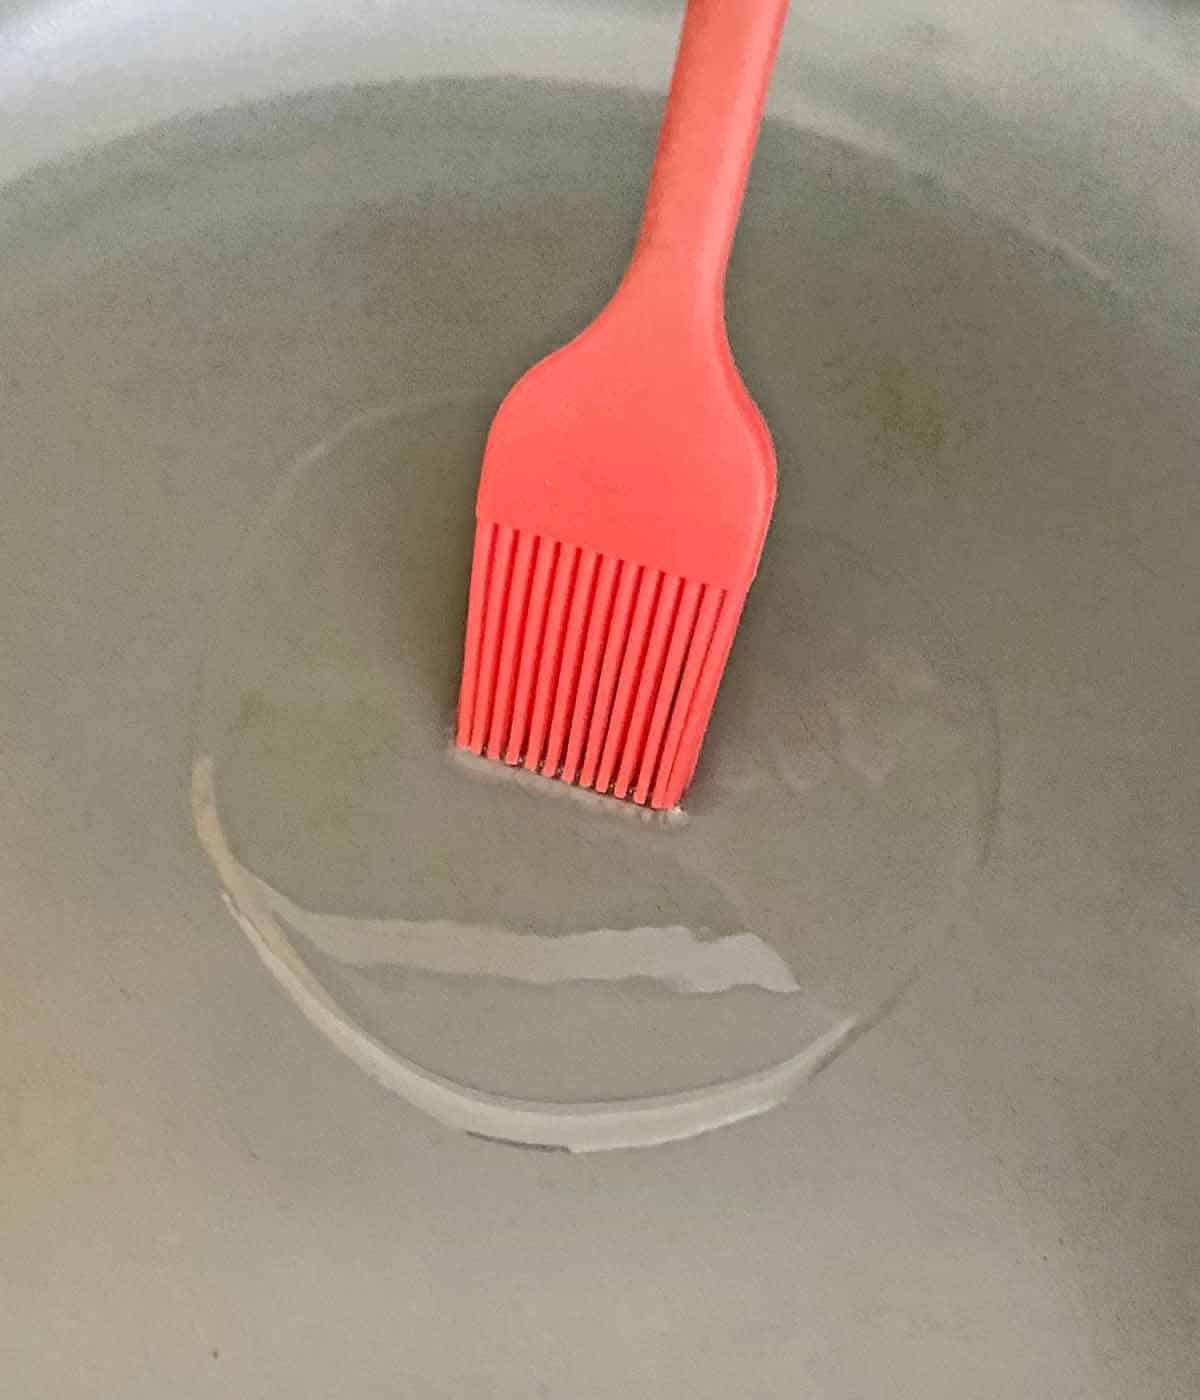 A red silicone brush spreading oil in a frying pan.